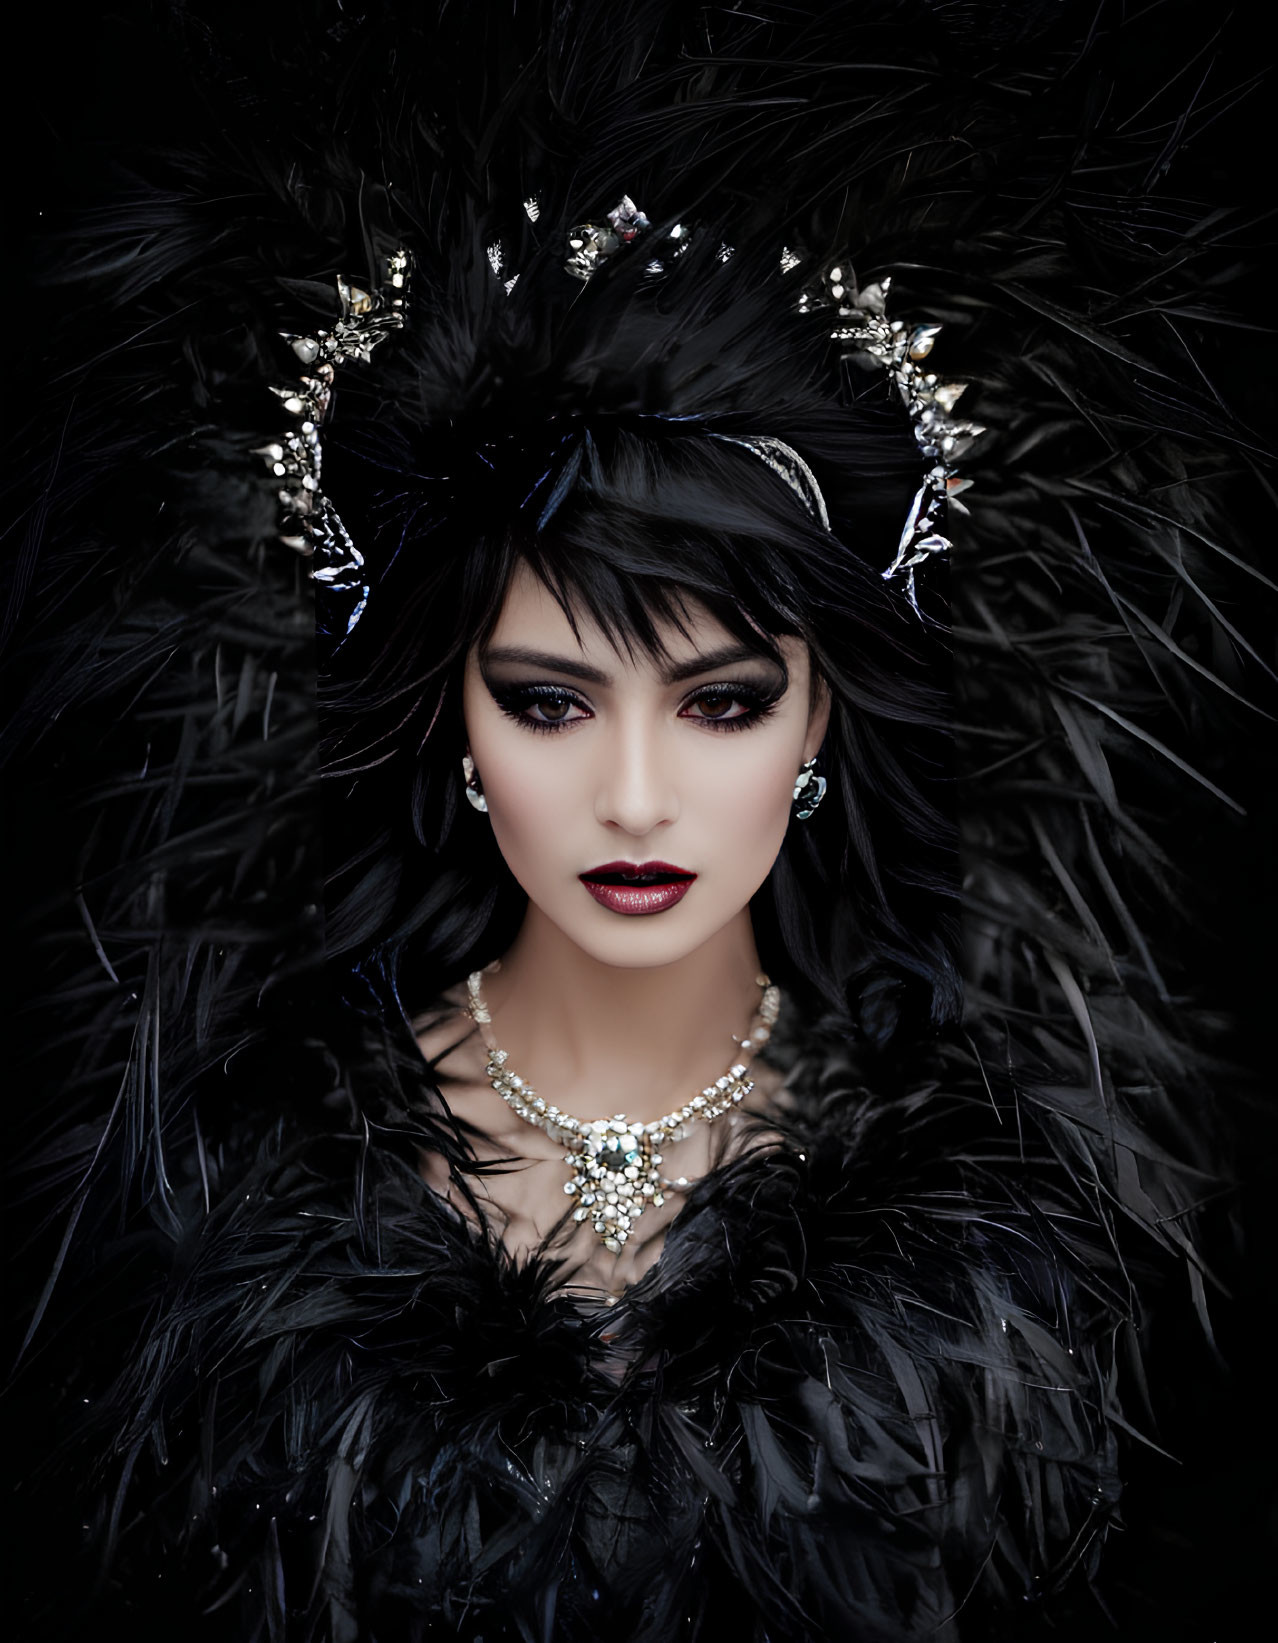 Dark Makeup and Feathered Headpiece with Jewels for a Gothic, Elegant Look